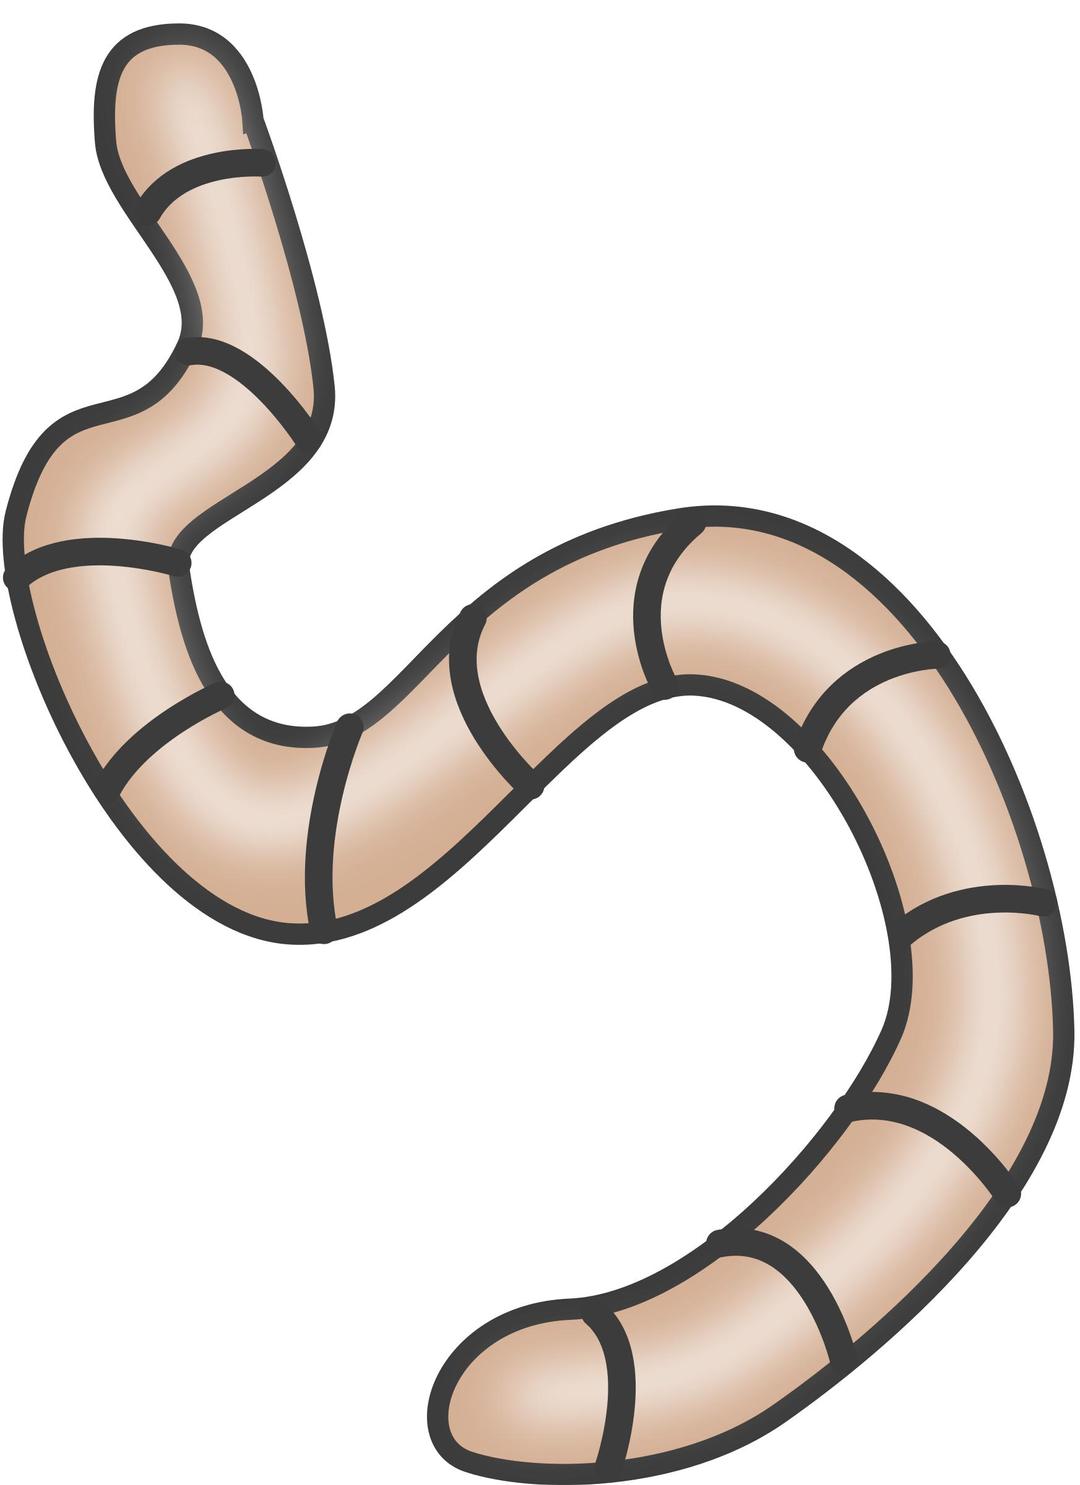 Earthworms png transparent